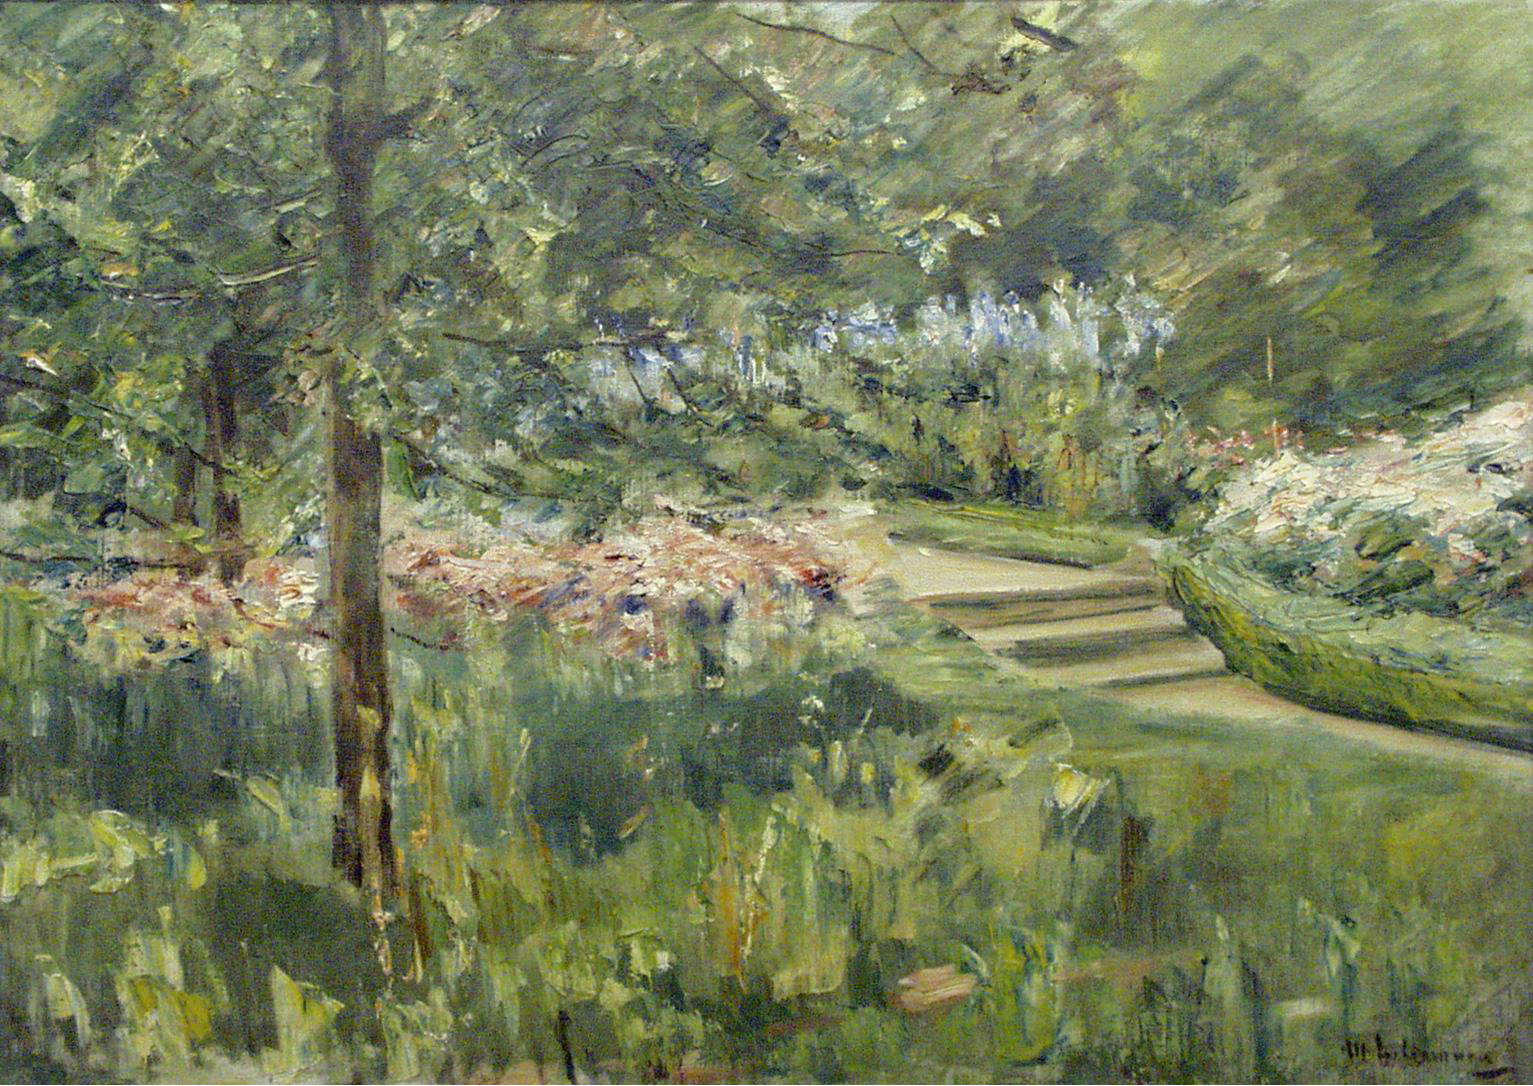 This image provided by the Israel Museum shows the reproduction of the &quot;Garden in Wannsee&quot; painting by the German-Jewish artist Max Liebermann which was confiscated by the Nazis during the World War II.